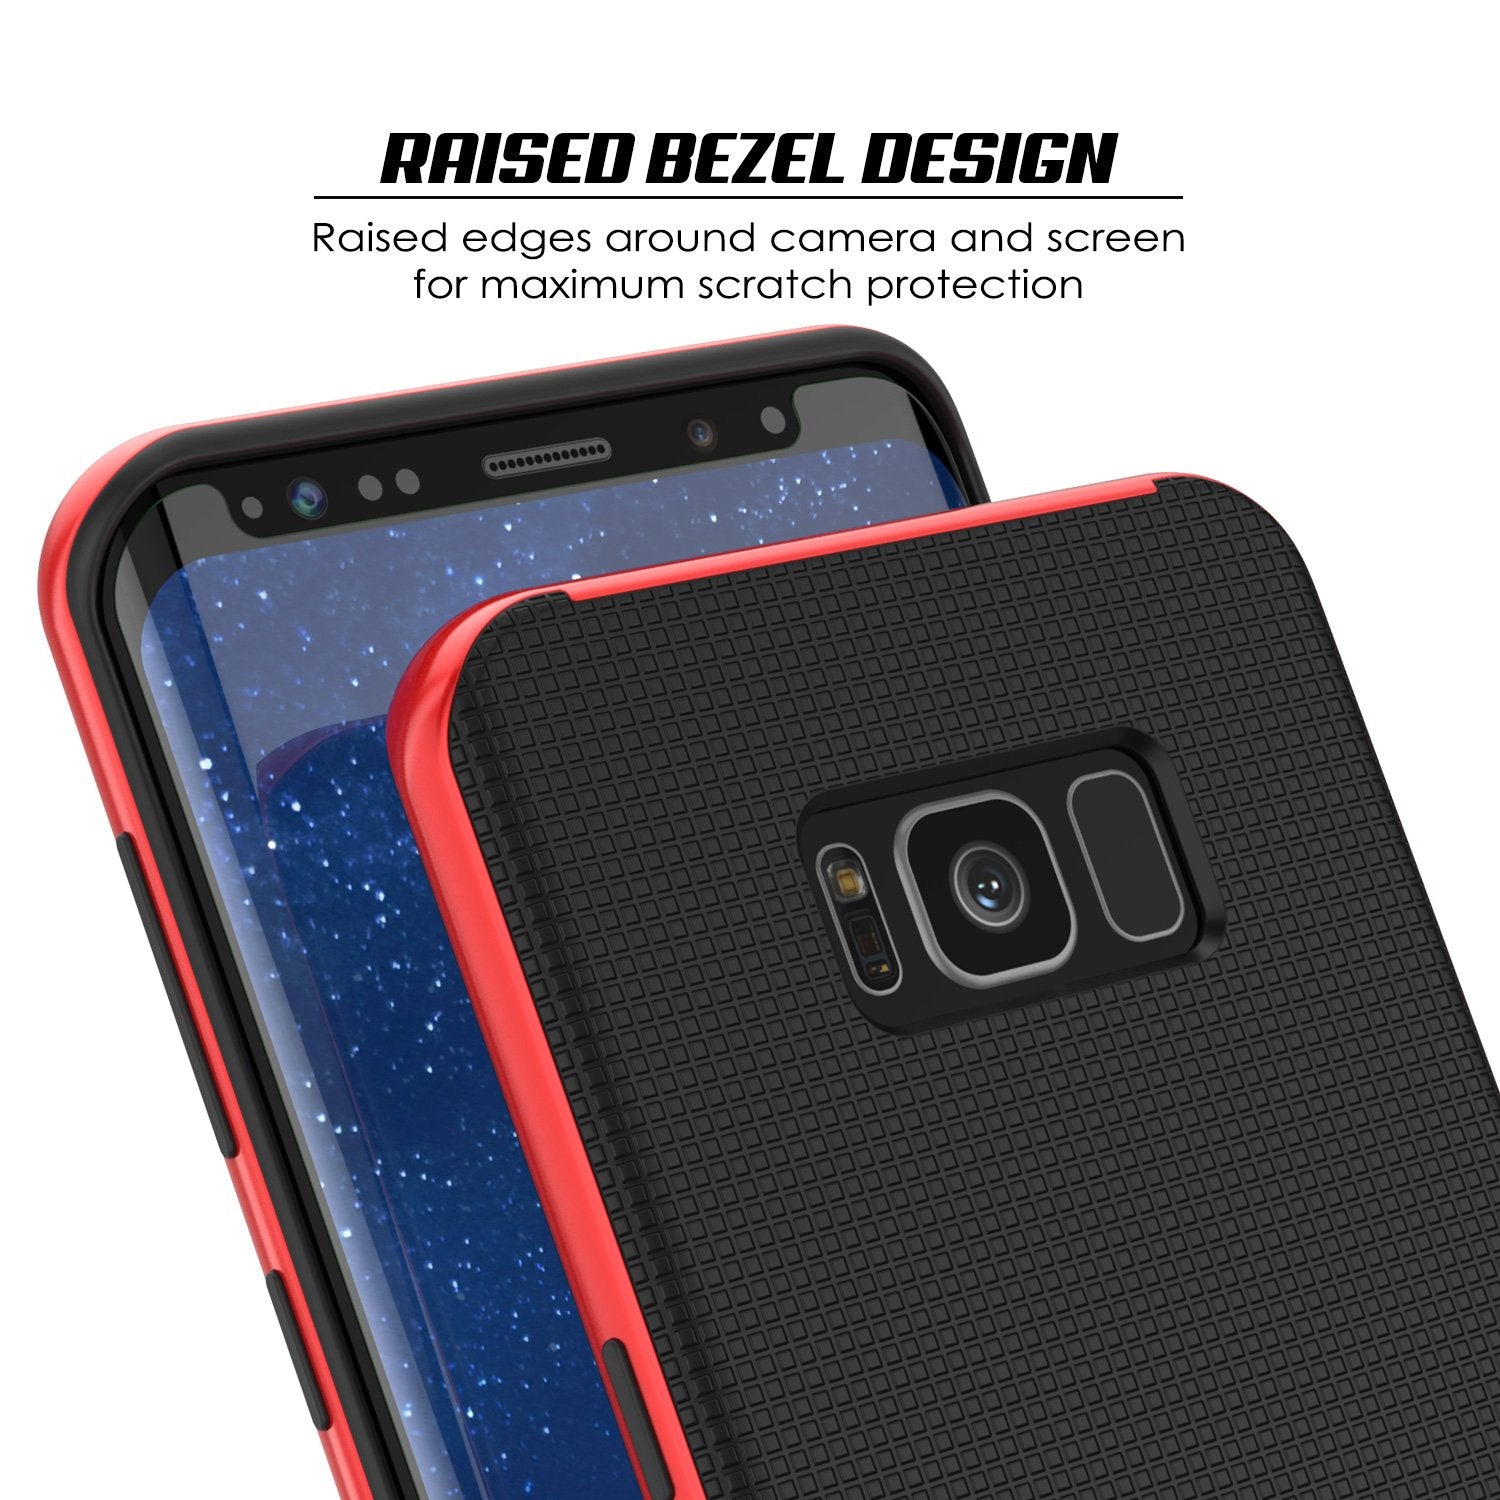 Galaxy S8 Plus Hybrid Shock Drop Proof Dual Layer Metal Case [Red]